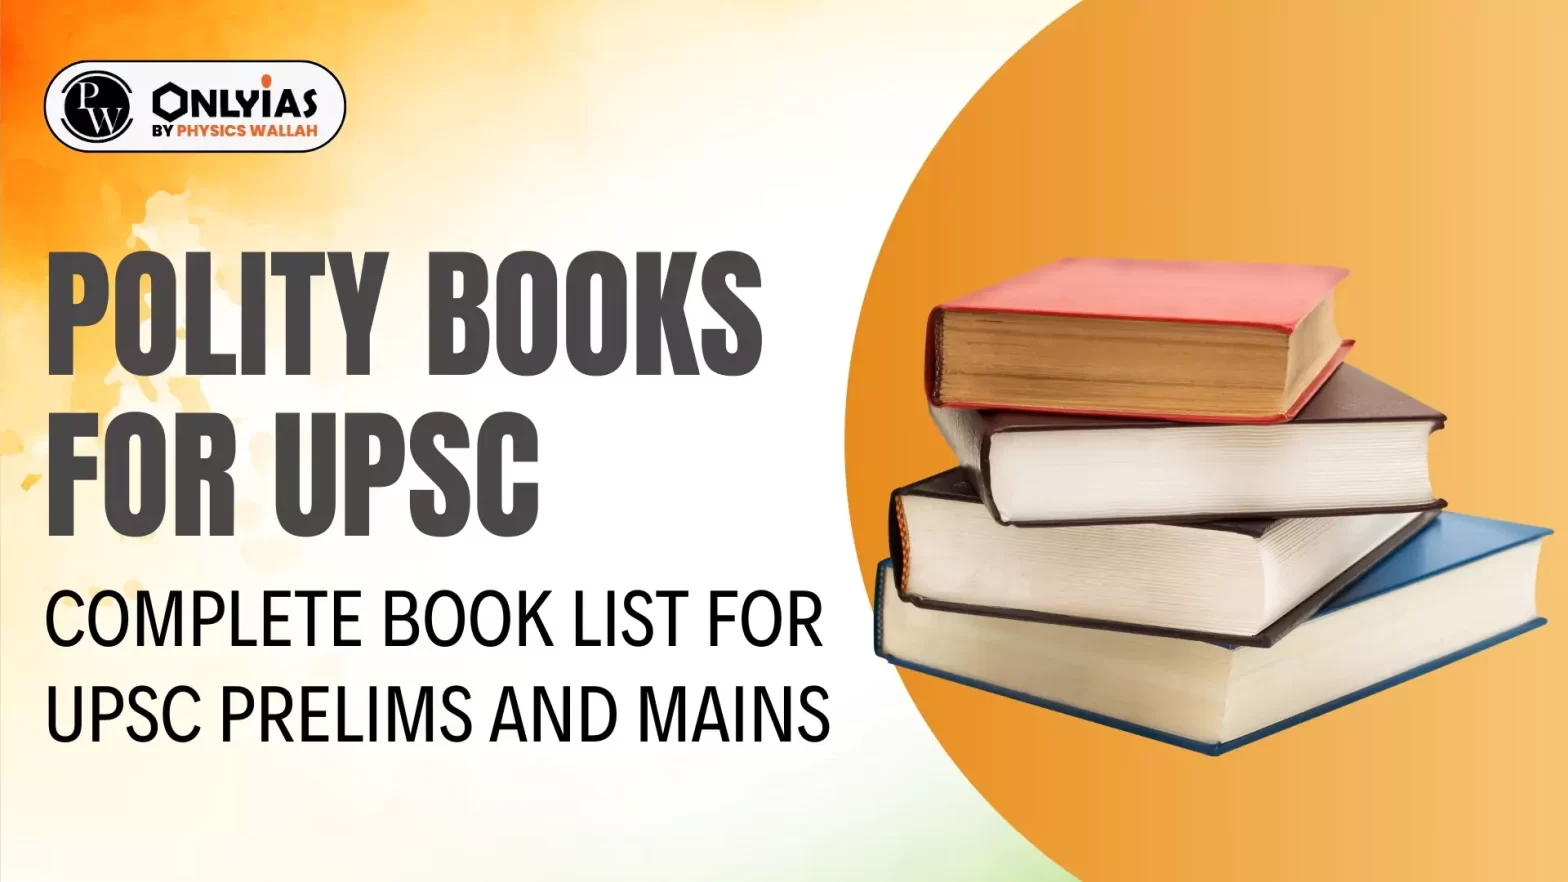 Polity Books for UPSC: Complete Book List for UPSC Prelims and Mains